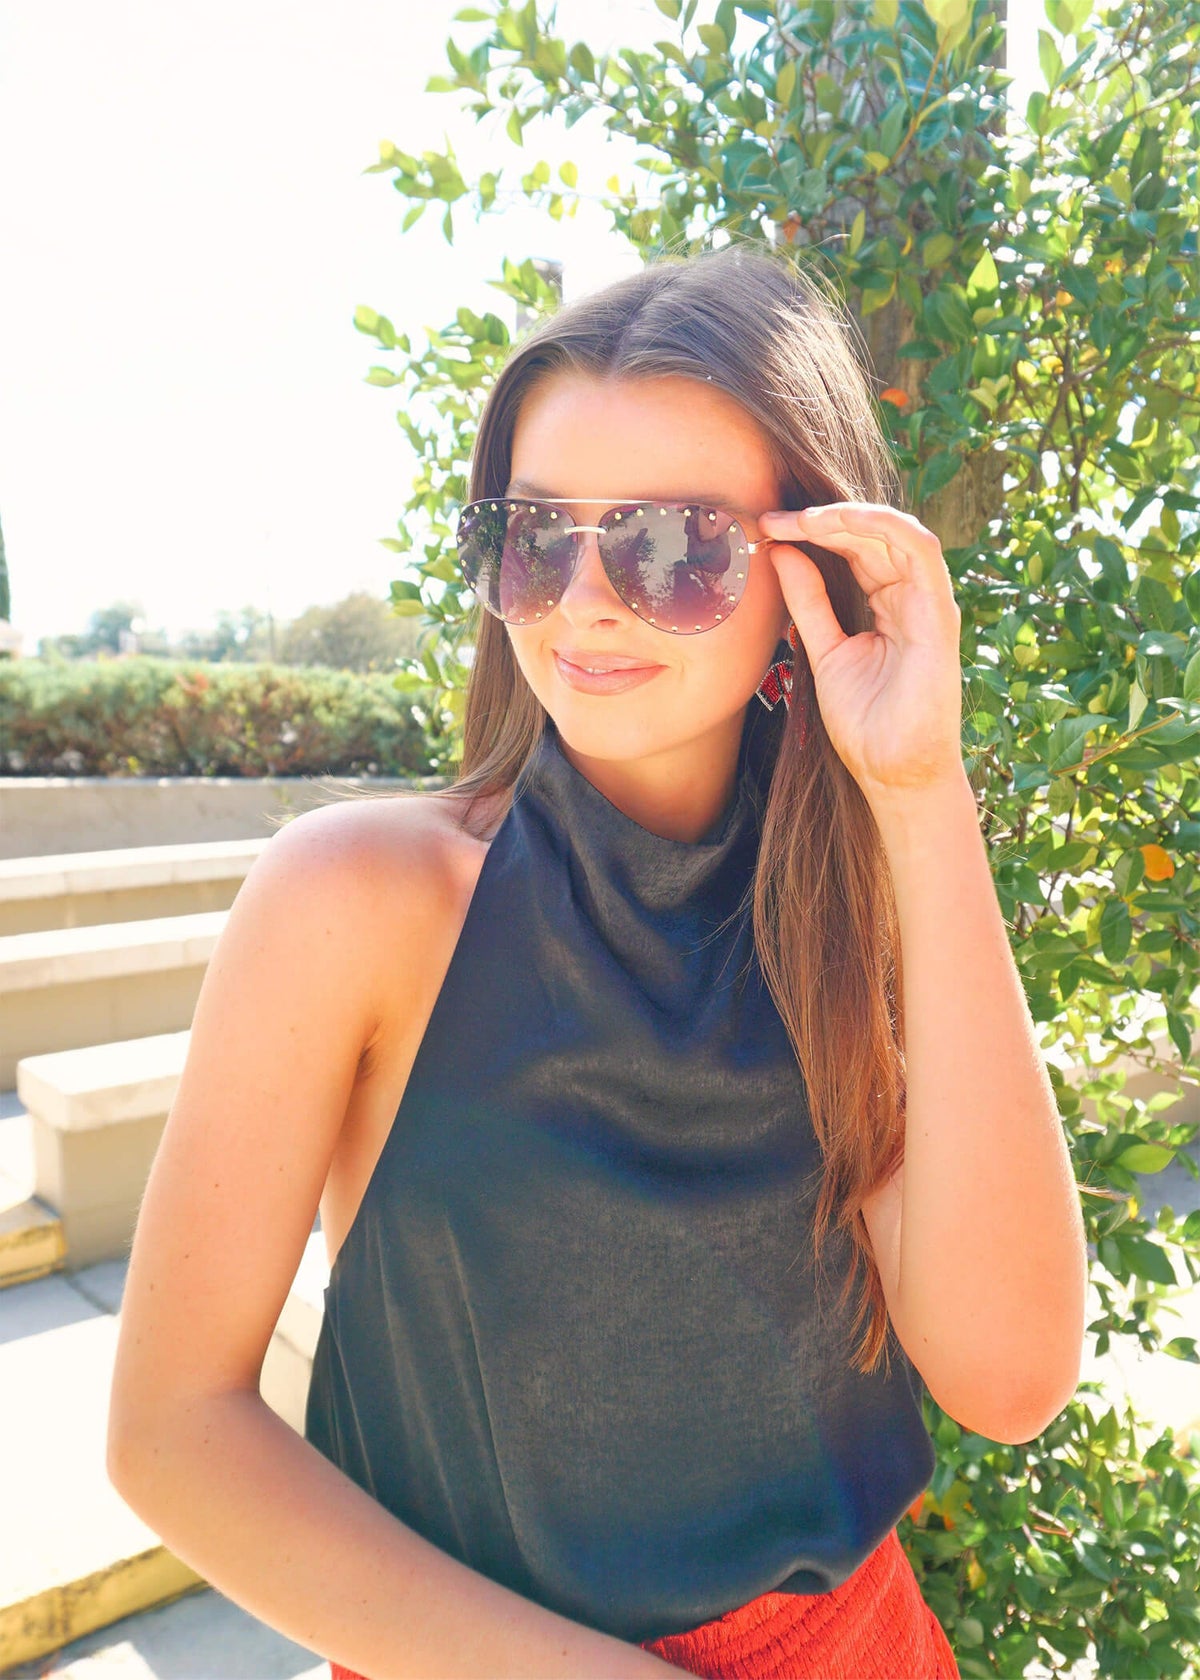 Can't Miss Sunglasses - Gold Sunglasses MerciGrace Boutique.